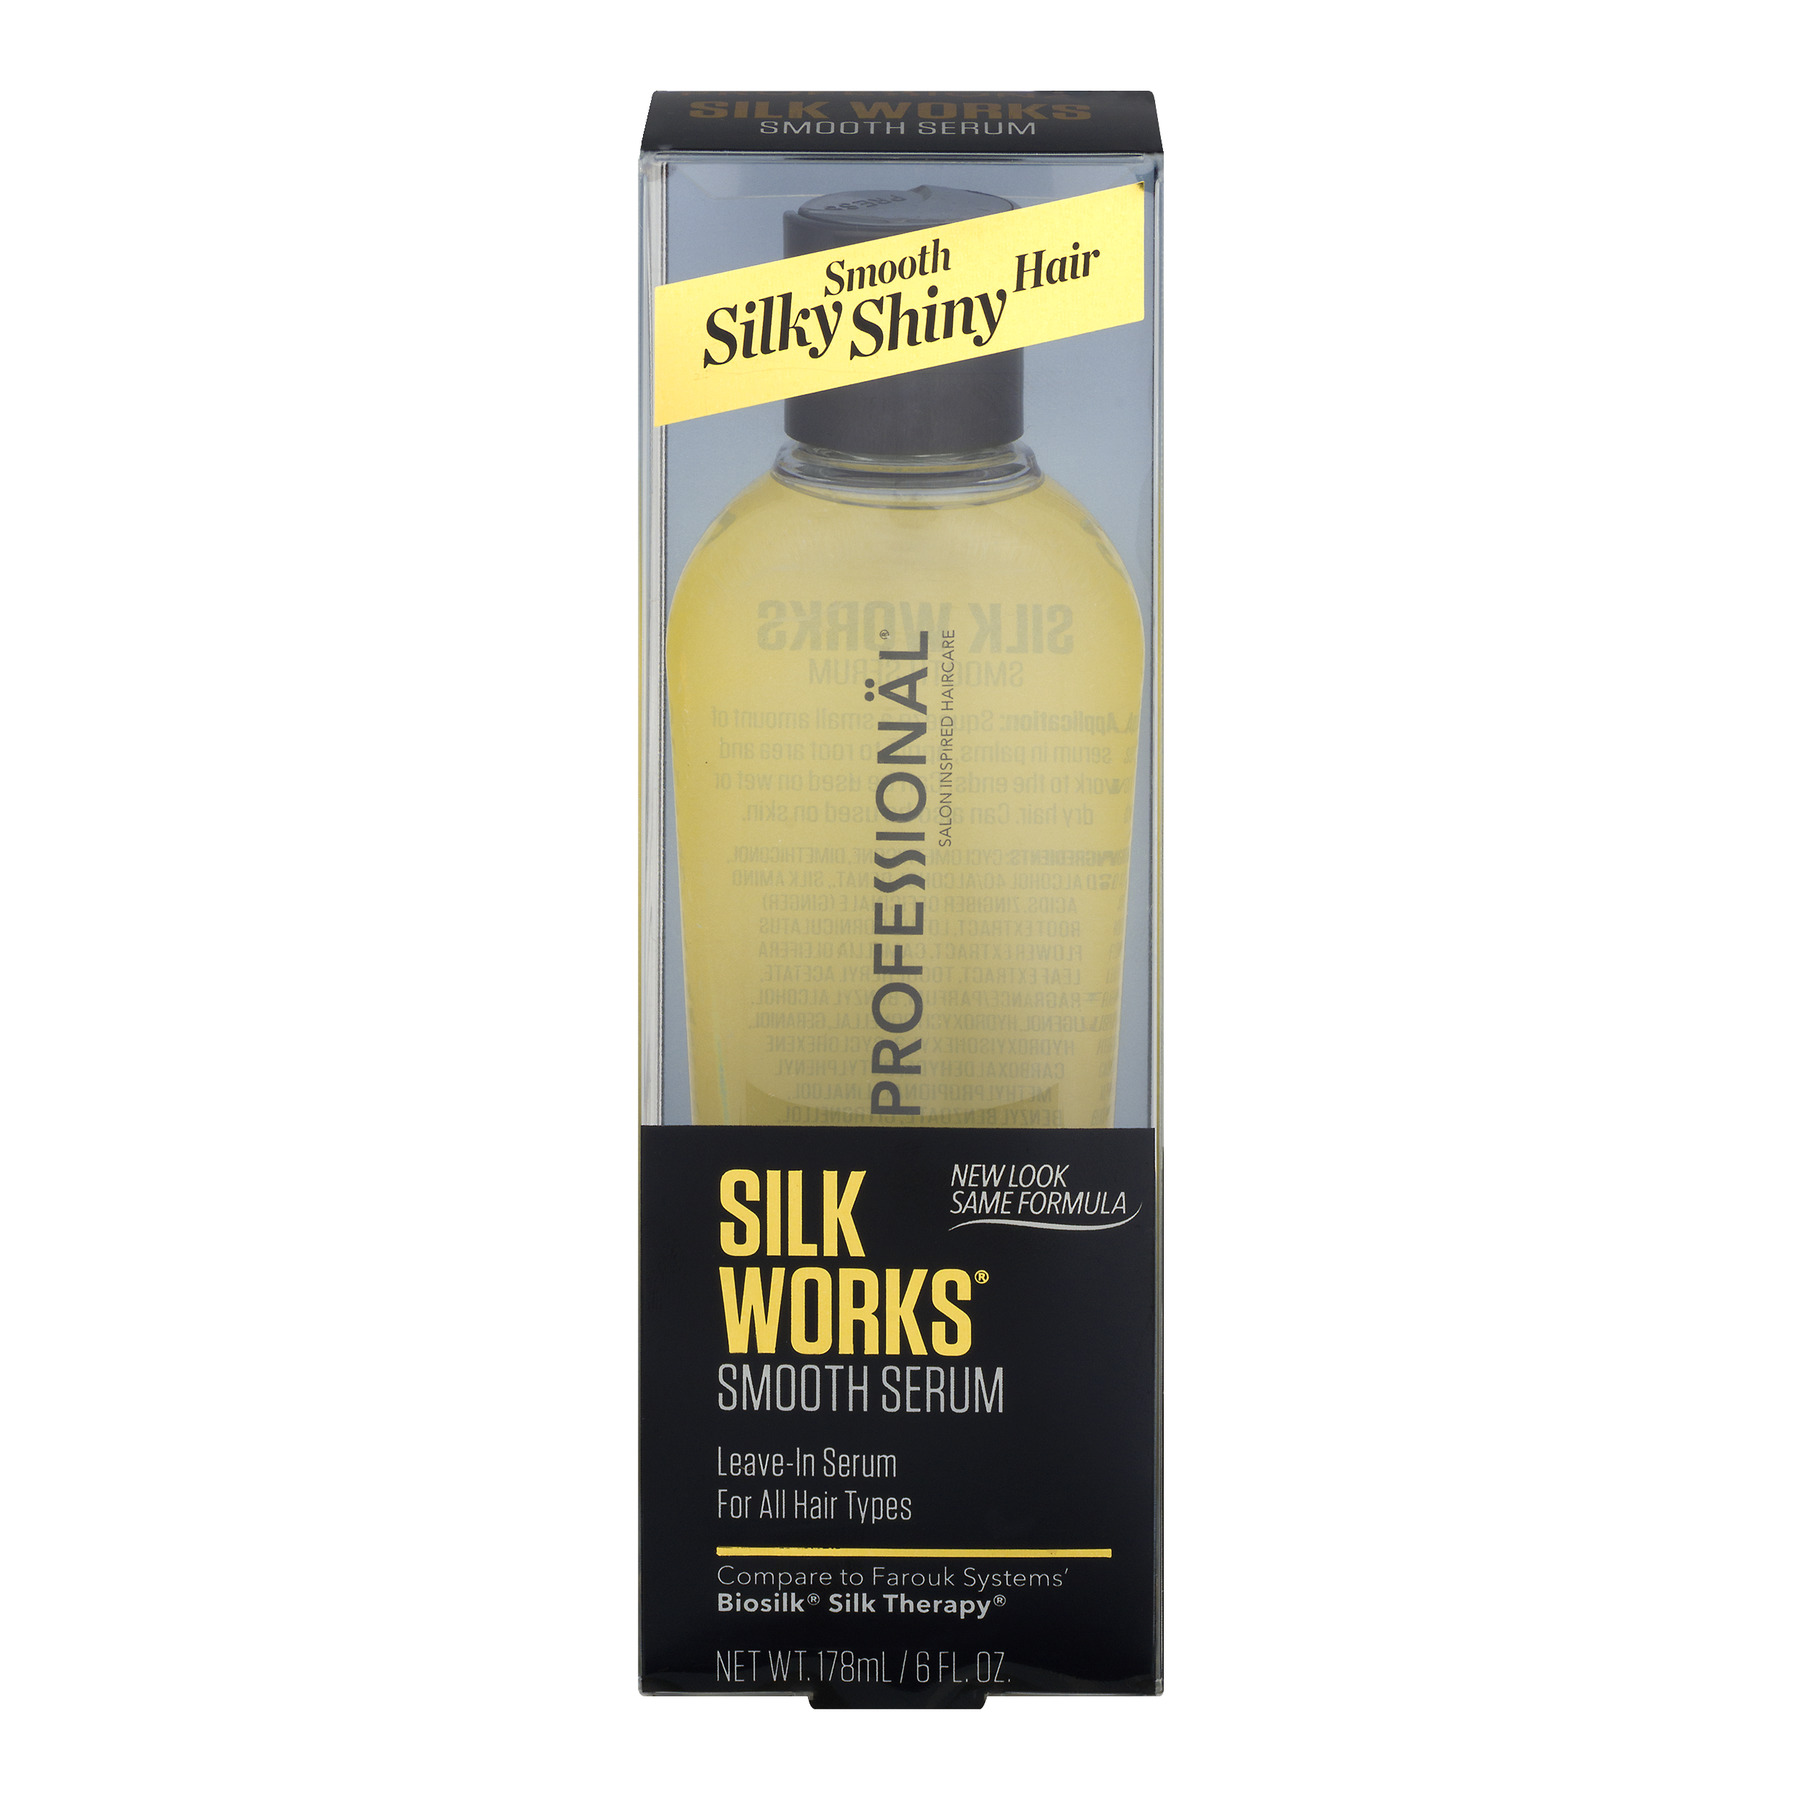 Silk Works Smooth Serum For All Hair, Silky Hair Serum Smoothing Treatment, 6 Oz - image 1 of 5